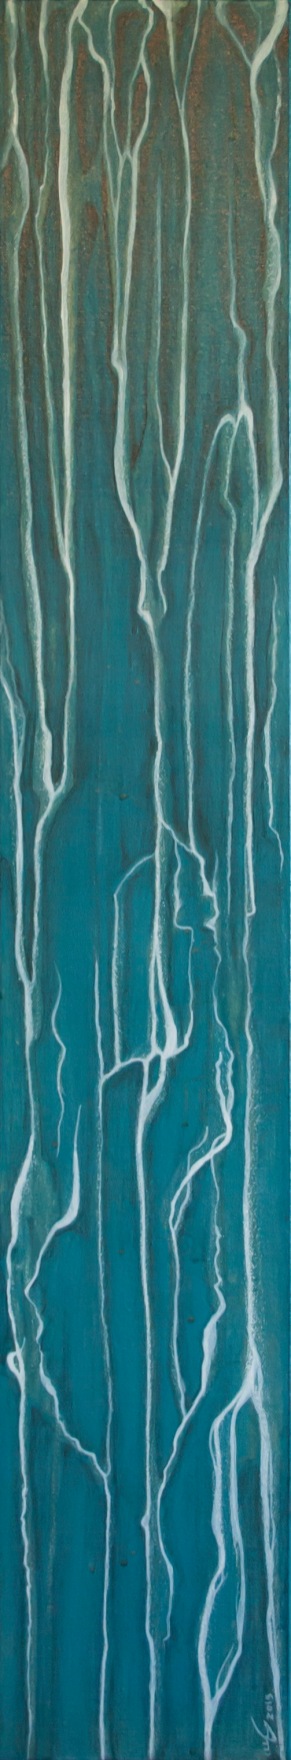 Tall and skinny blue acrylic painting